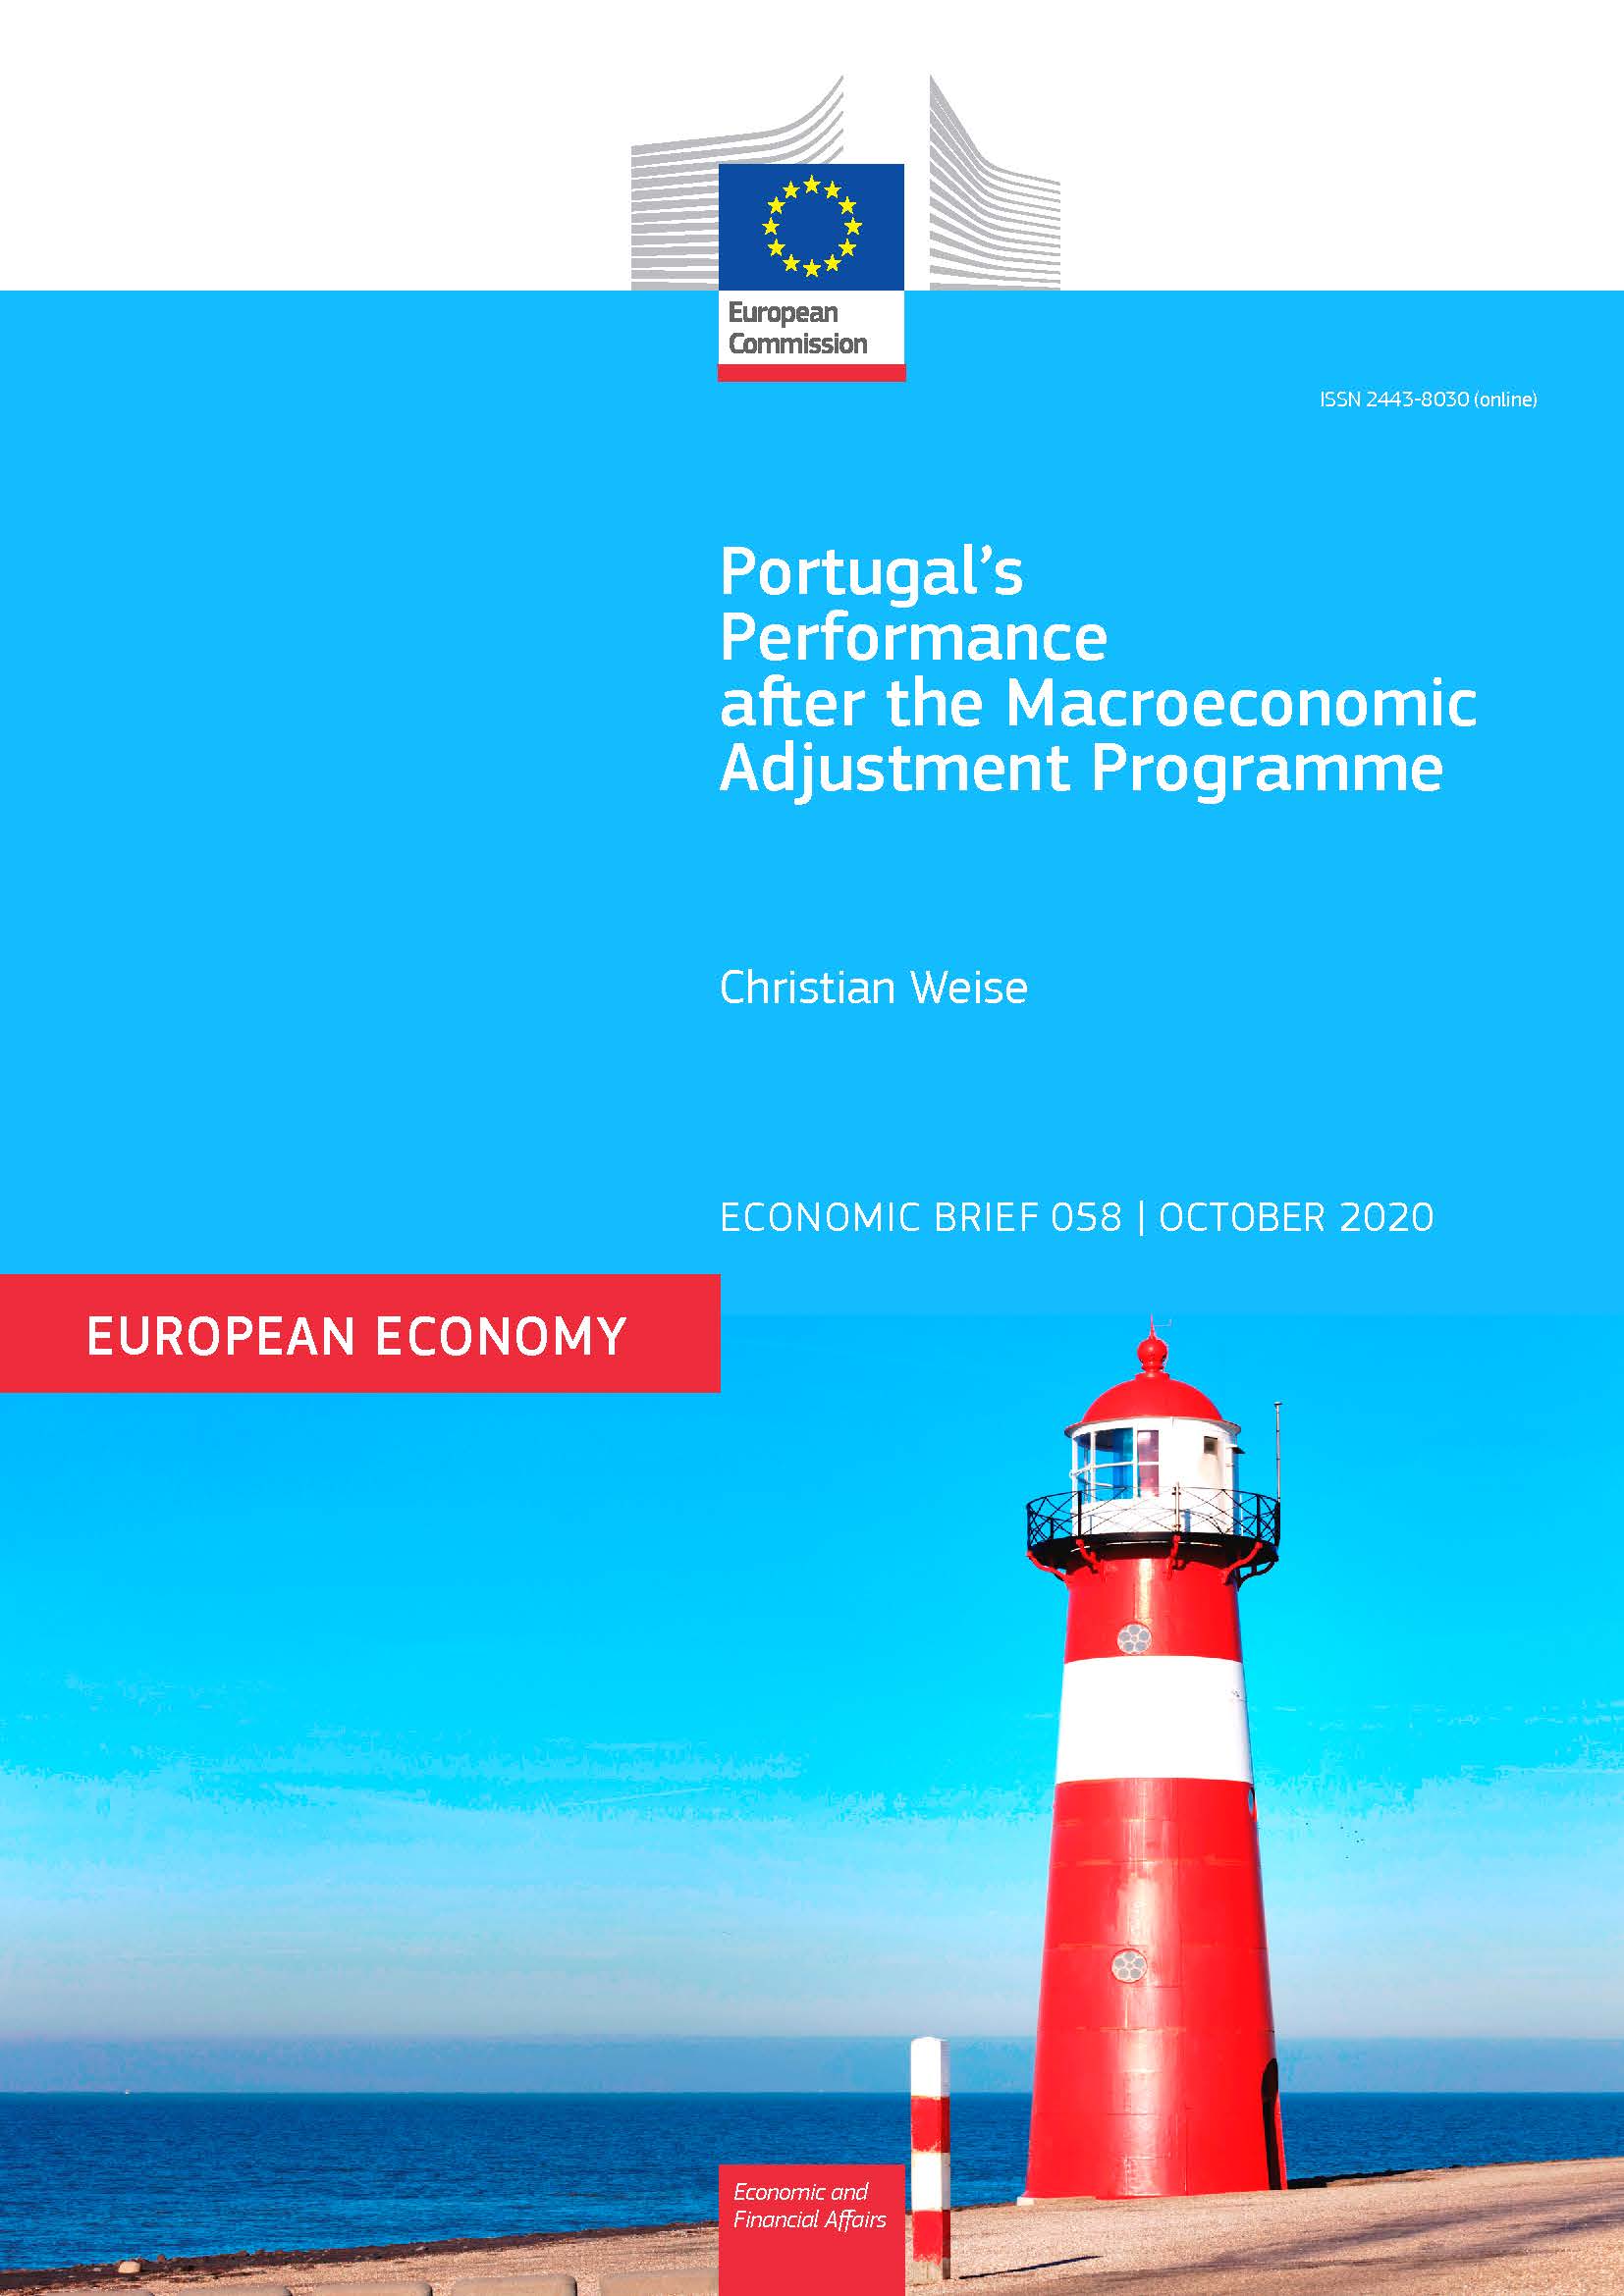 Portugal’s Performance after the Macroeconomic Adjustment Programme